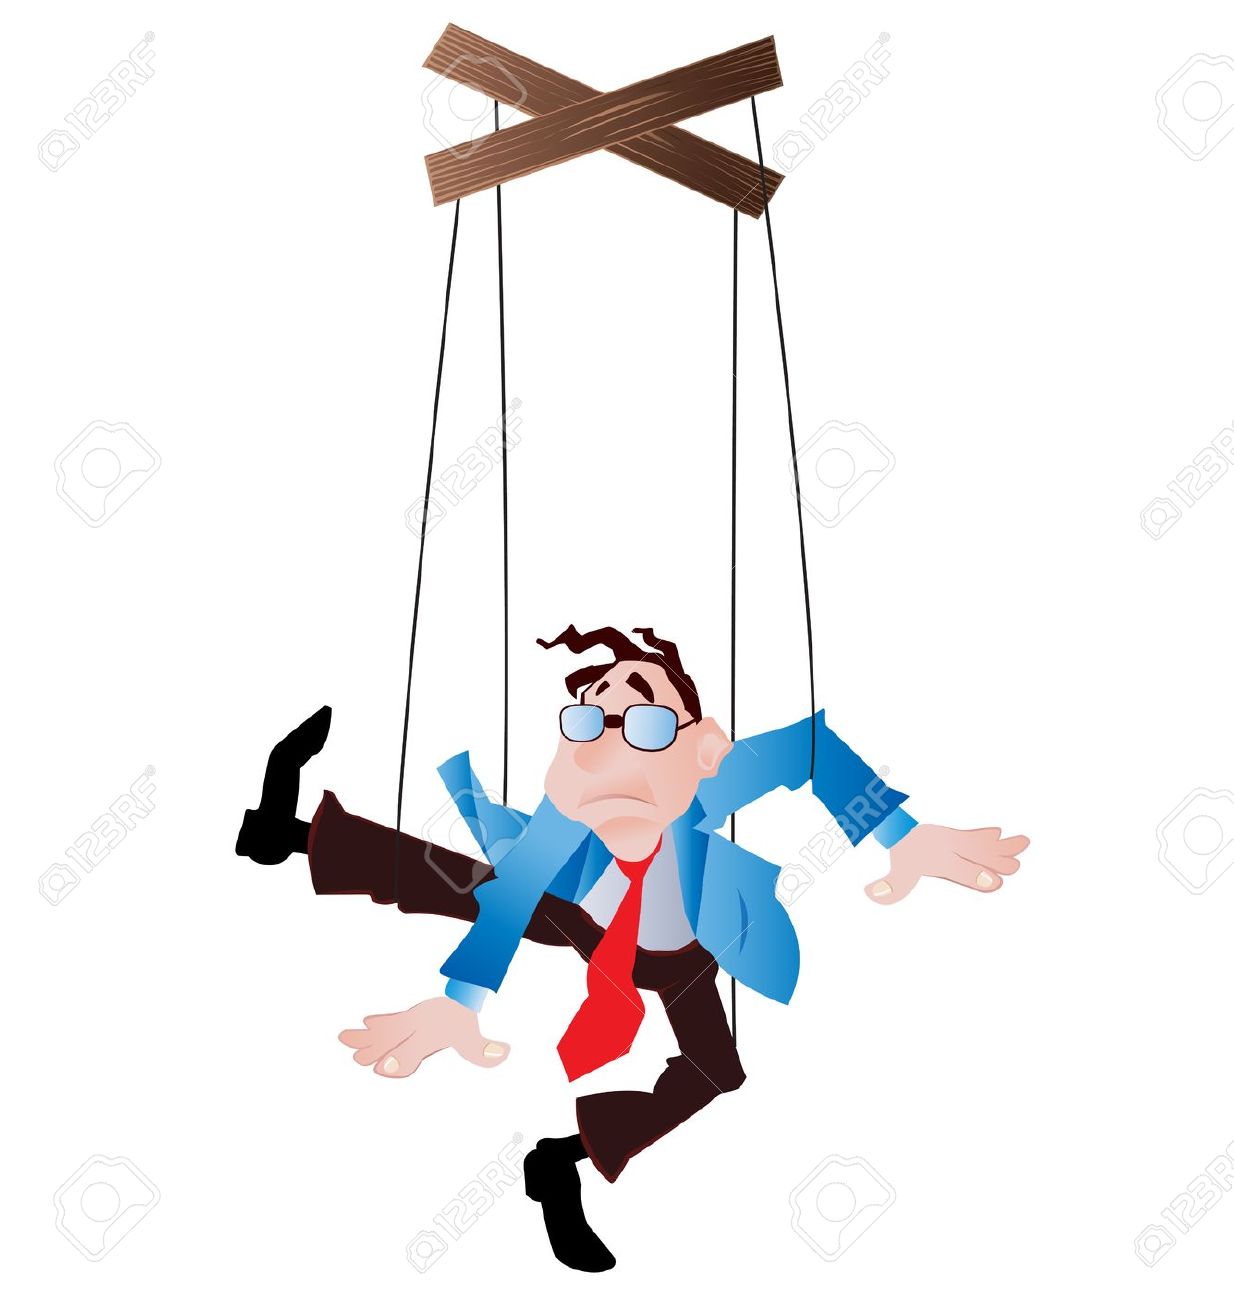 Clip Art Puppet On A String.